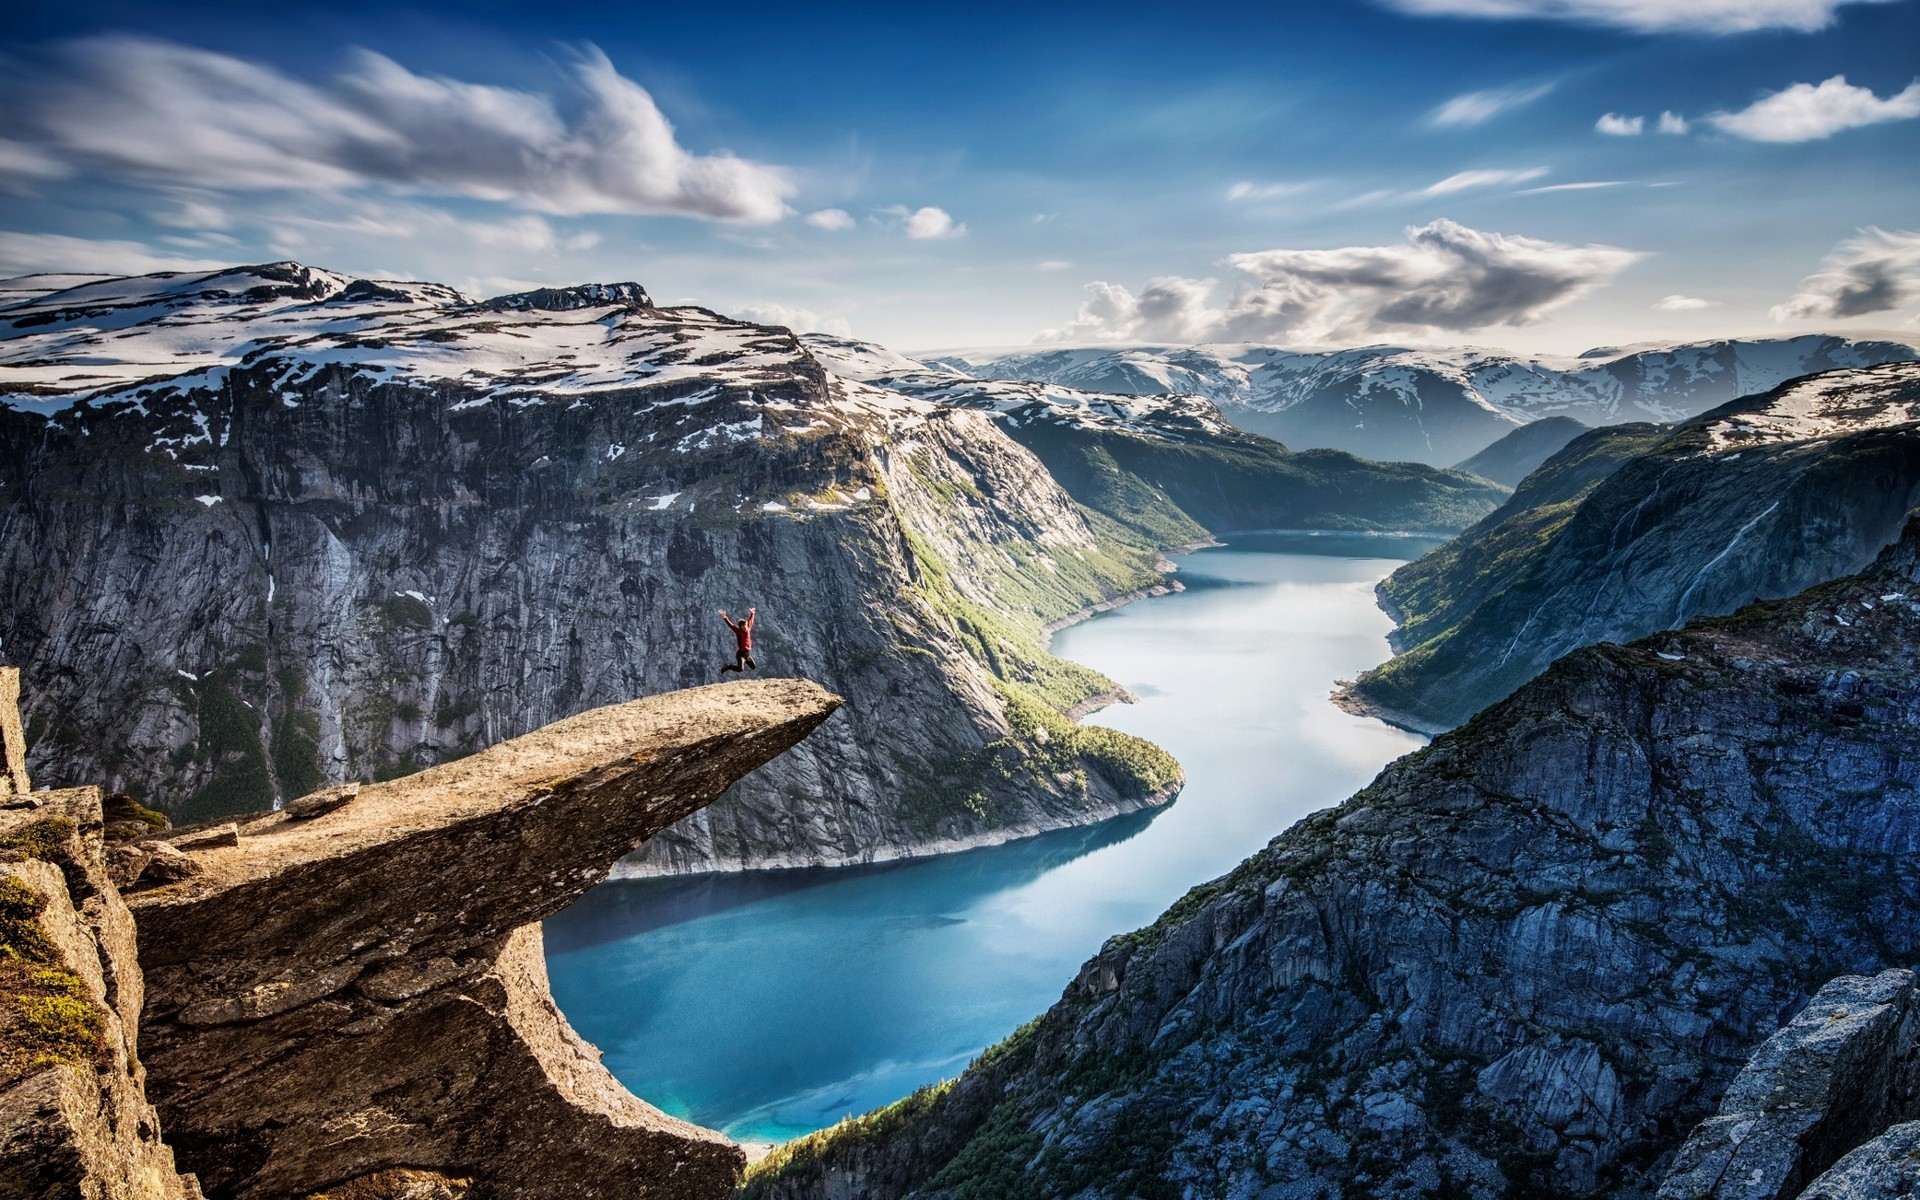 General 1920x1200 nature landscape fjord Norway canyon cliff snow mountains clouds turquoise water jumping morning Trolltunga nordic landscapes